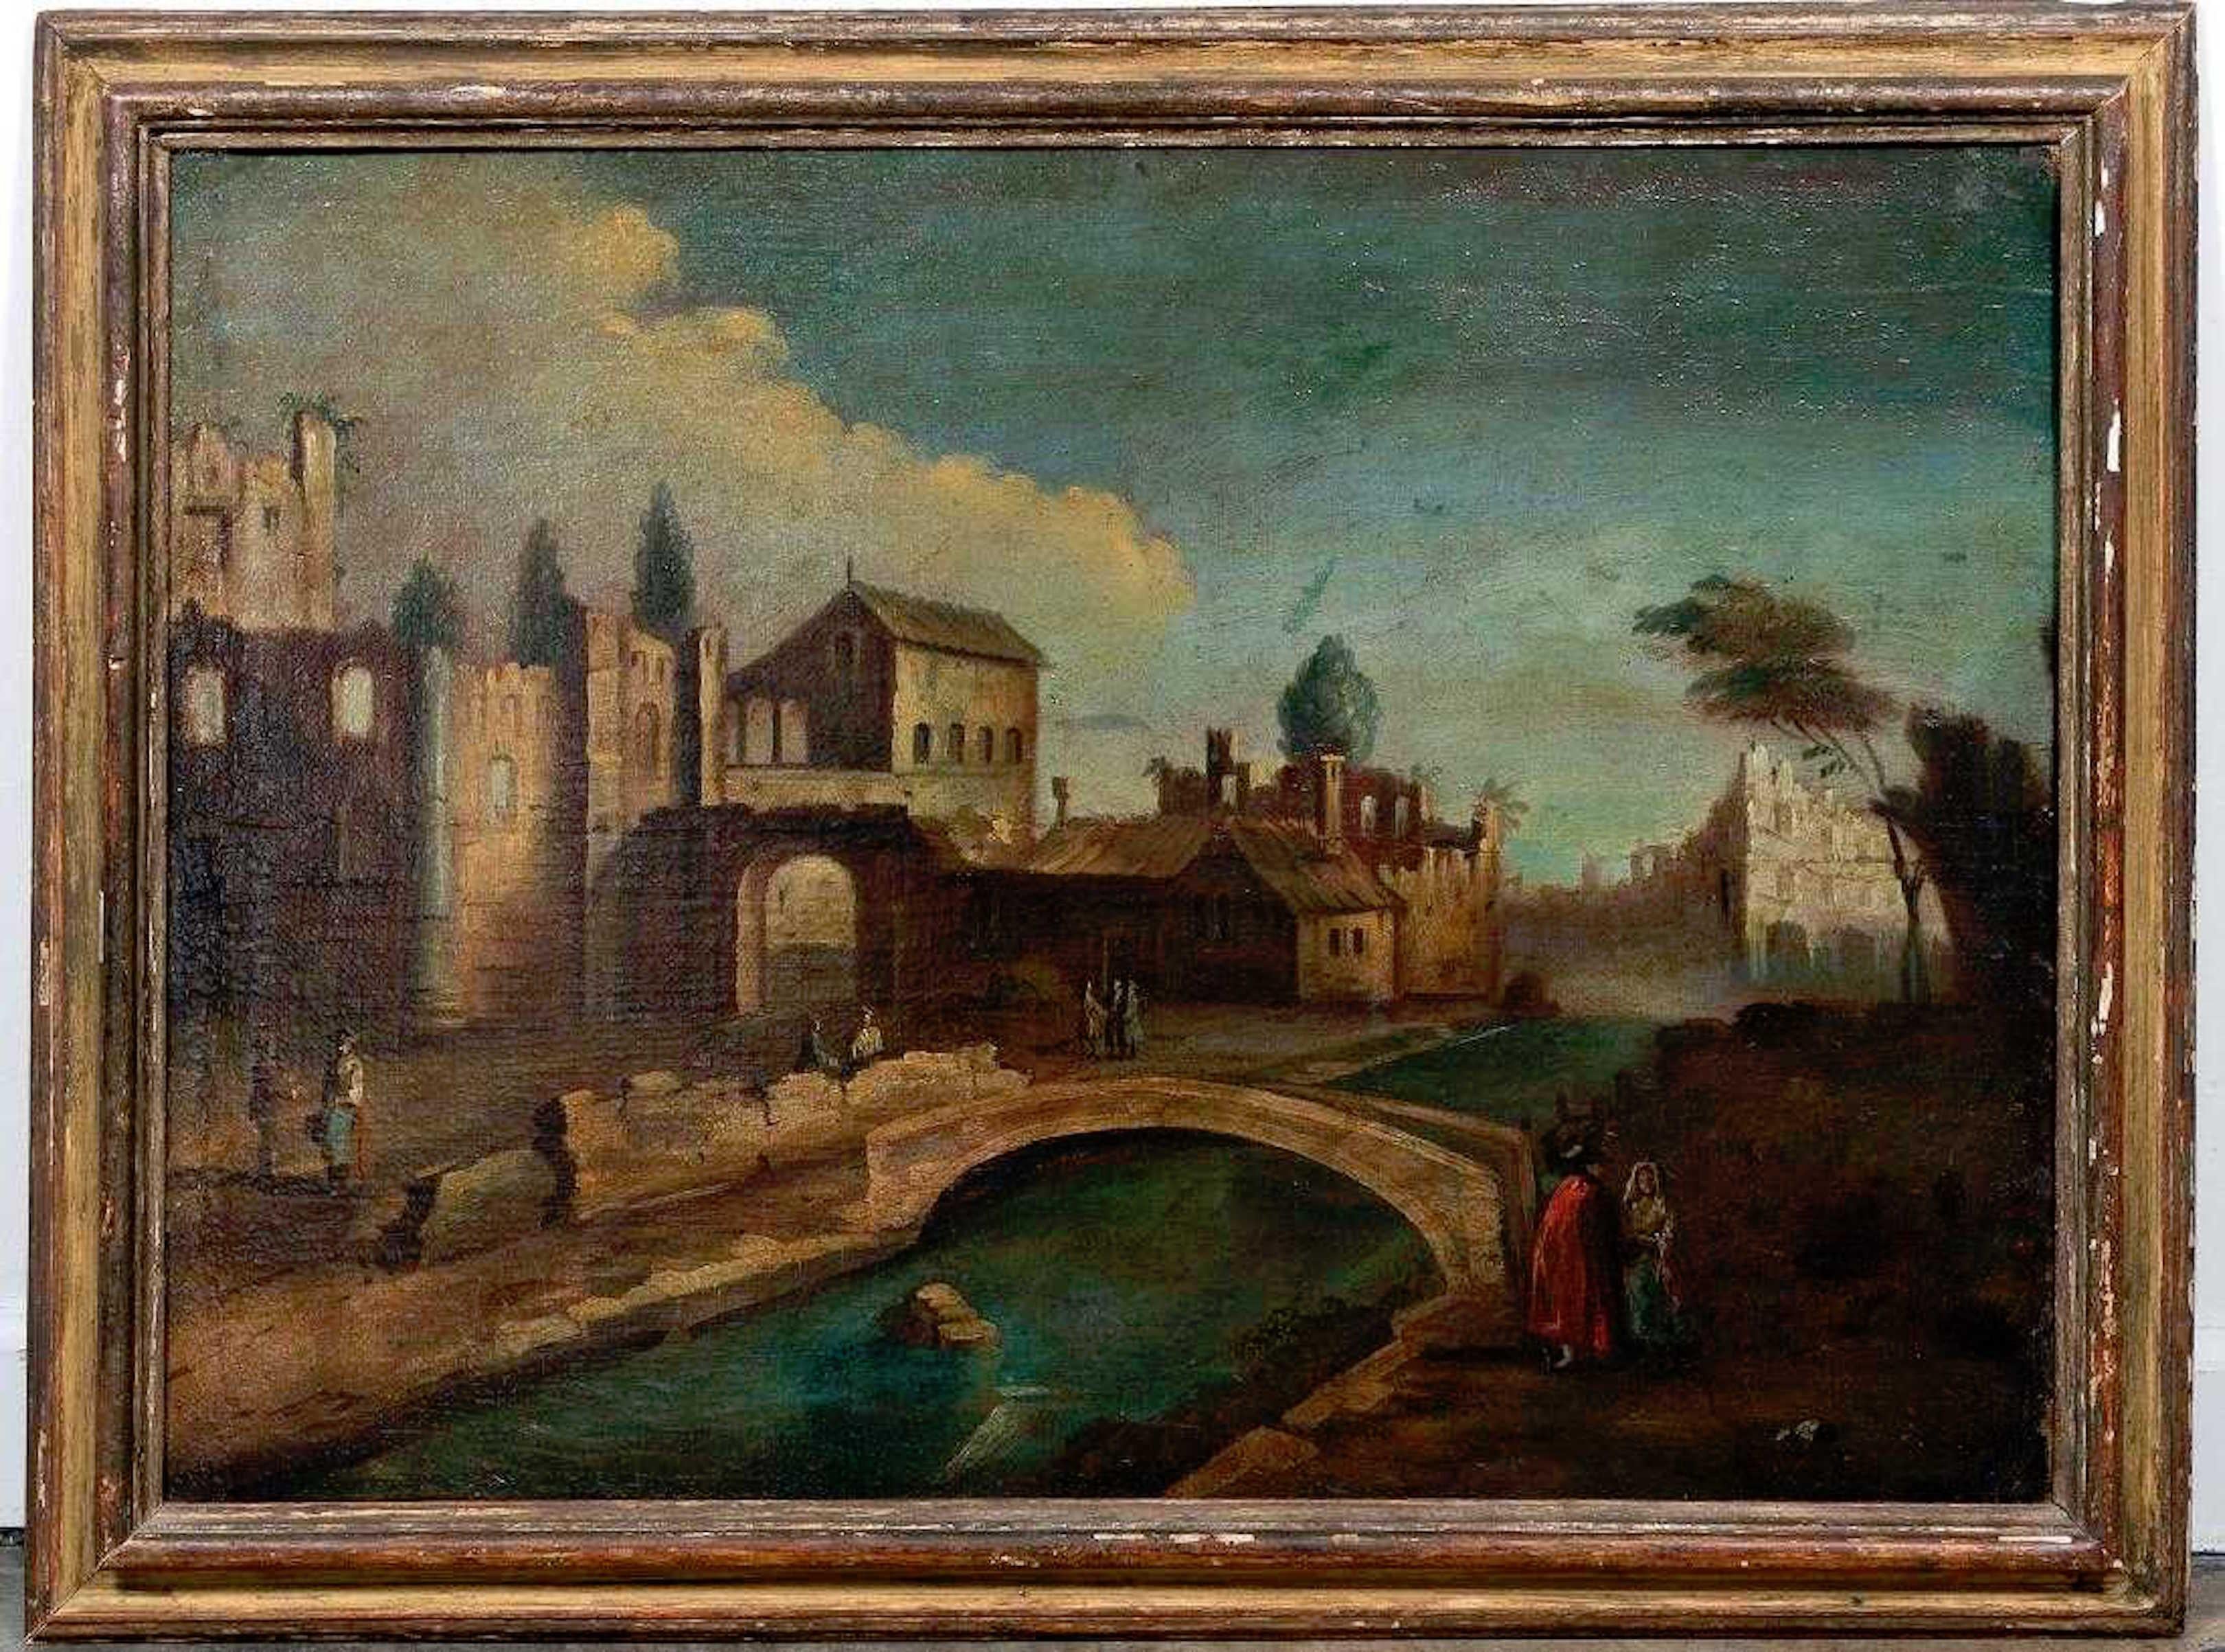 18th century Italian school old master landscape, city view, oil on linen, unsigned. Wonderful untouched condition, distressed evenly, no rips or tears.
Measures: Linen canvas 25.75